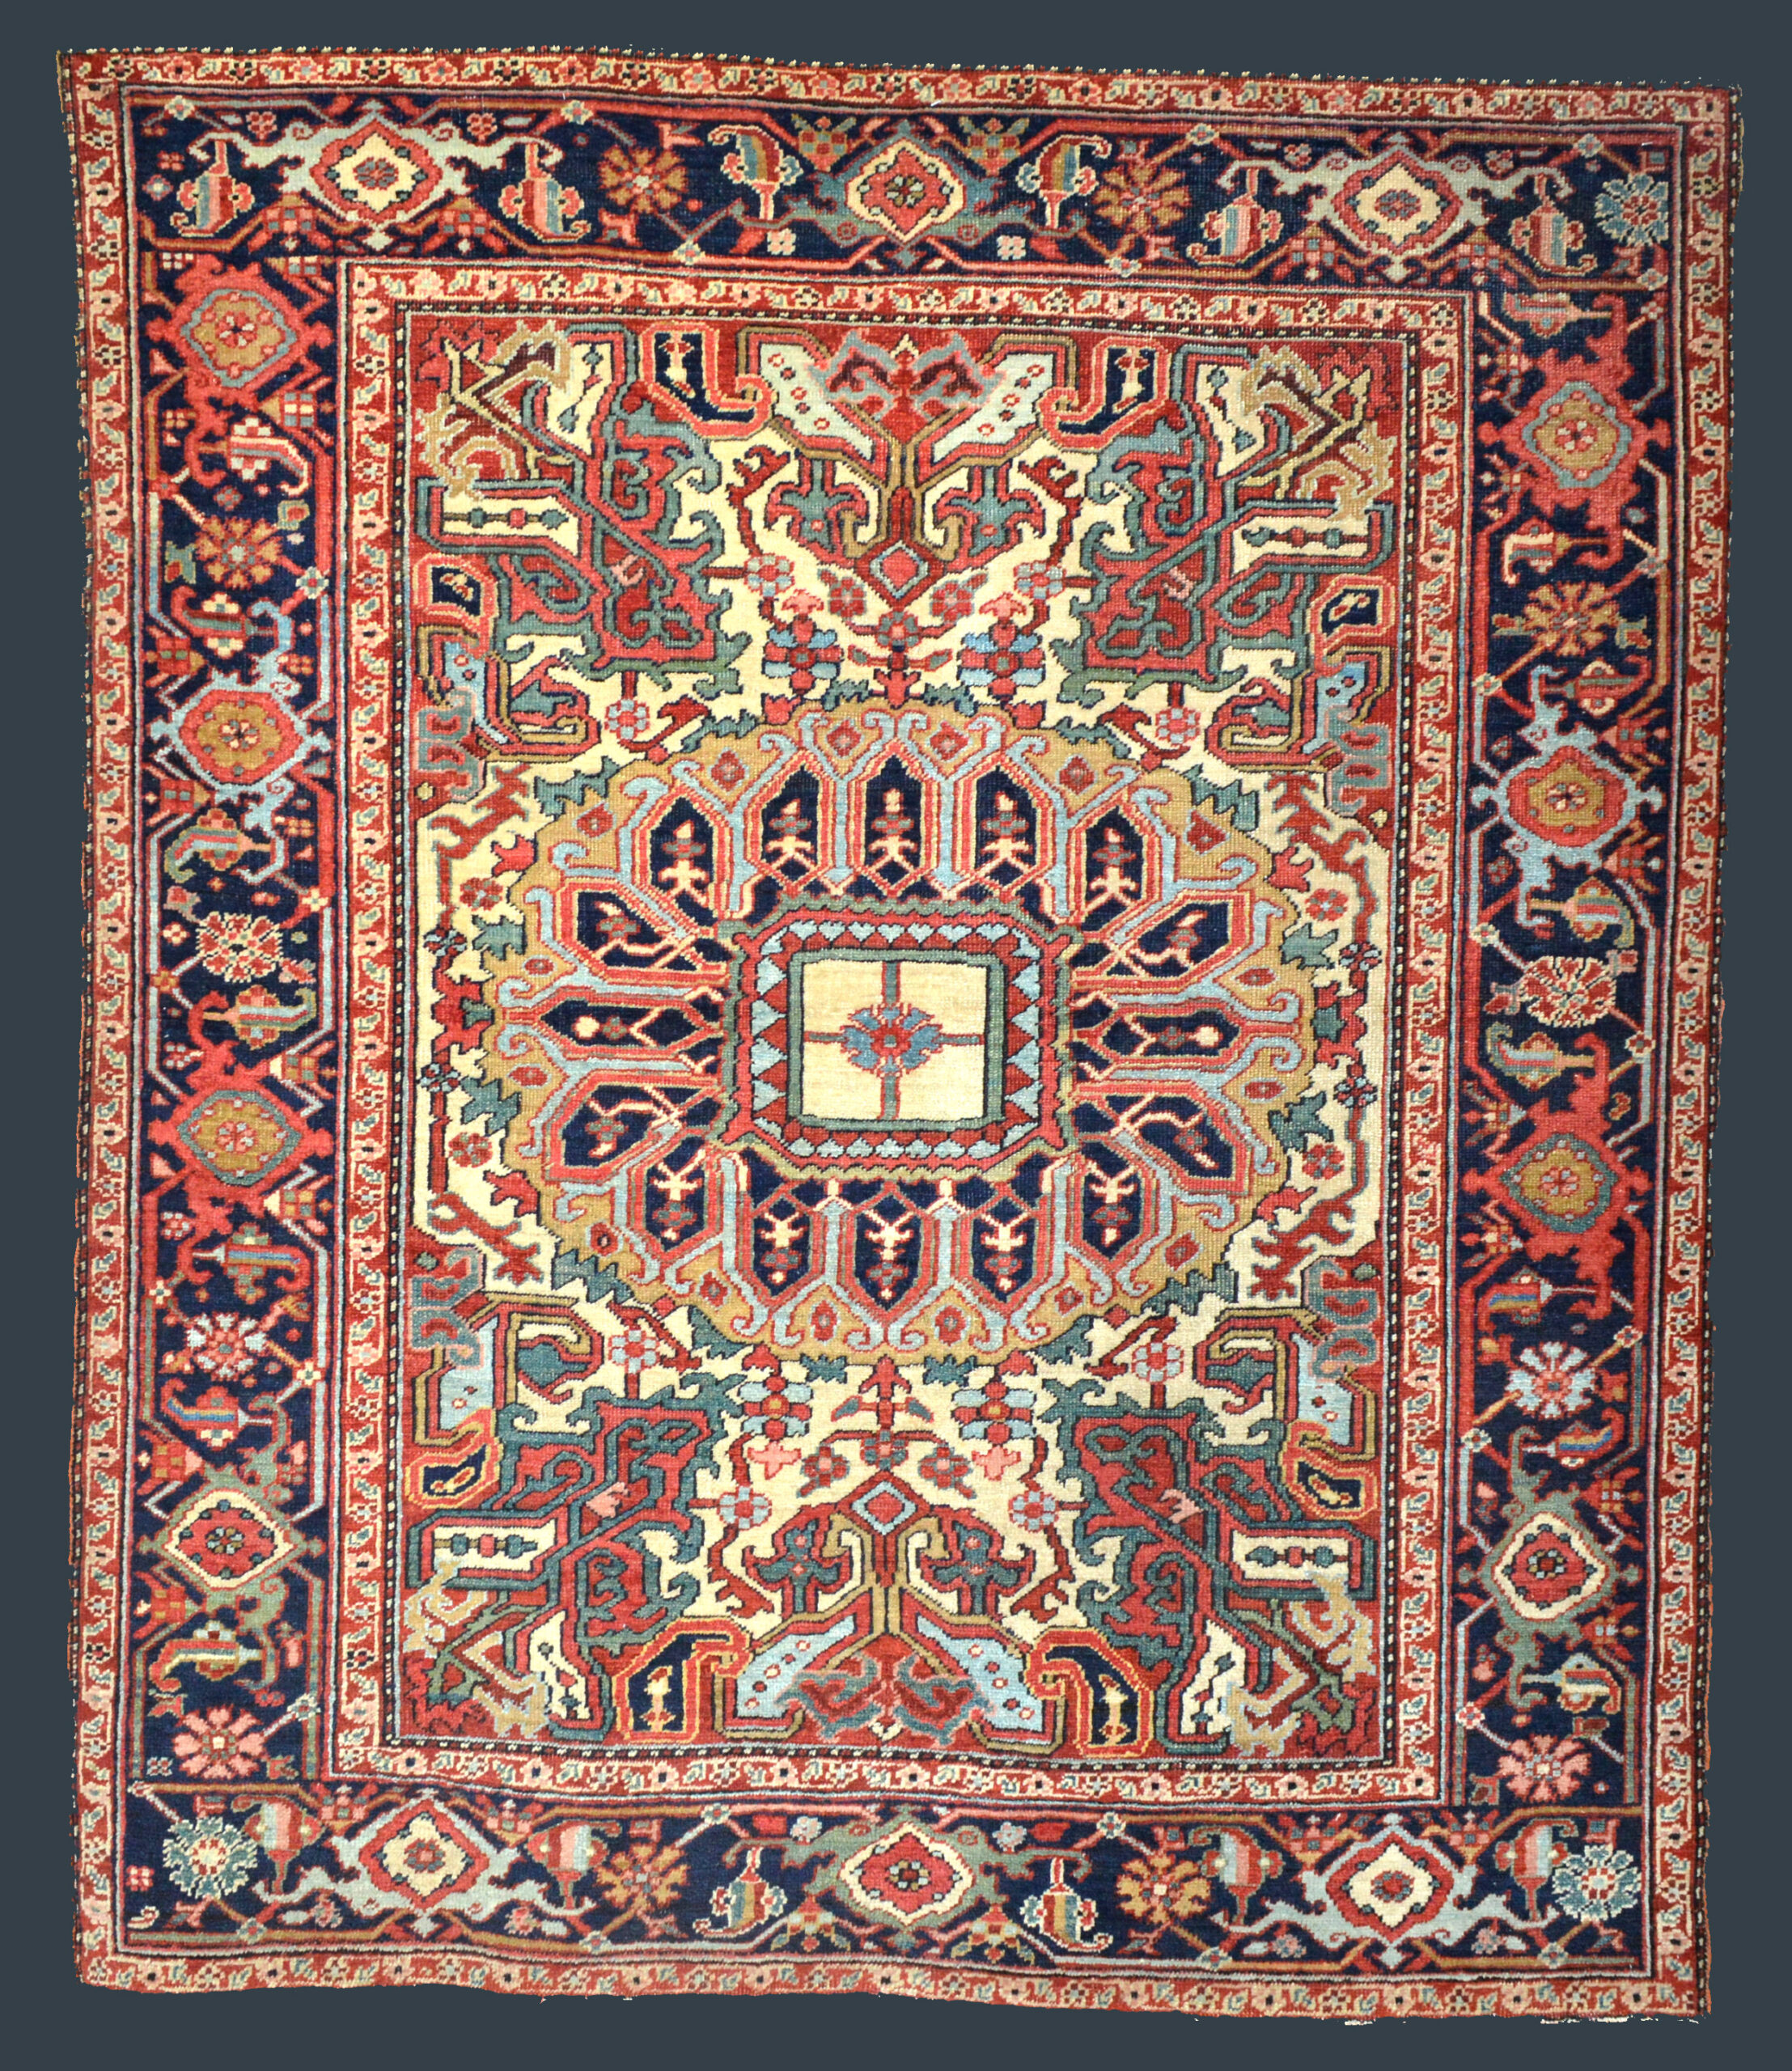 Antique Heriz Serapi rug with ivory field and a complex central medallion